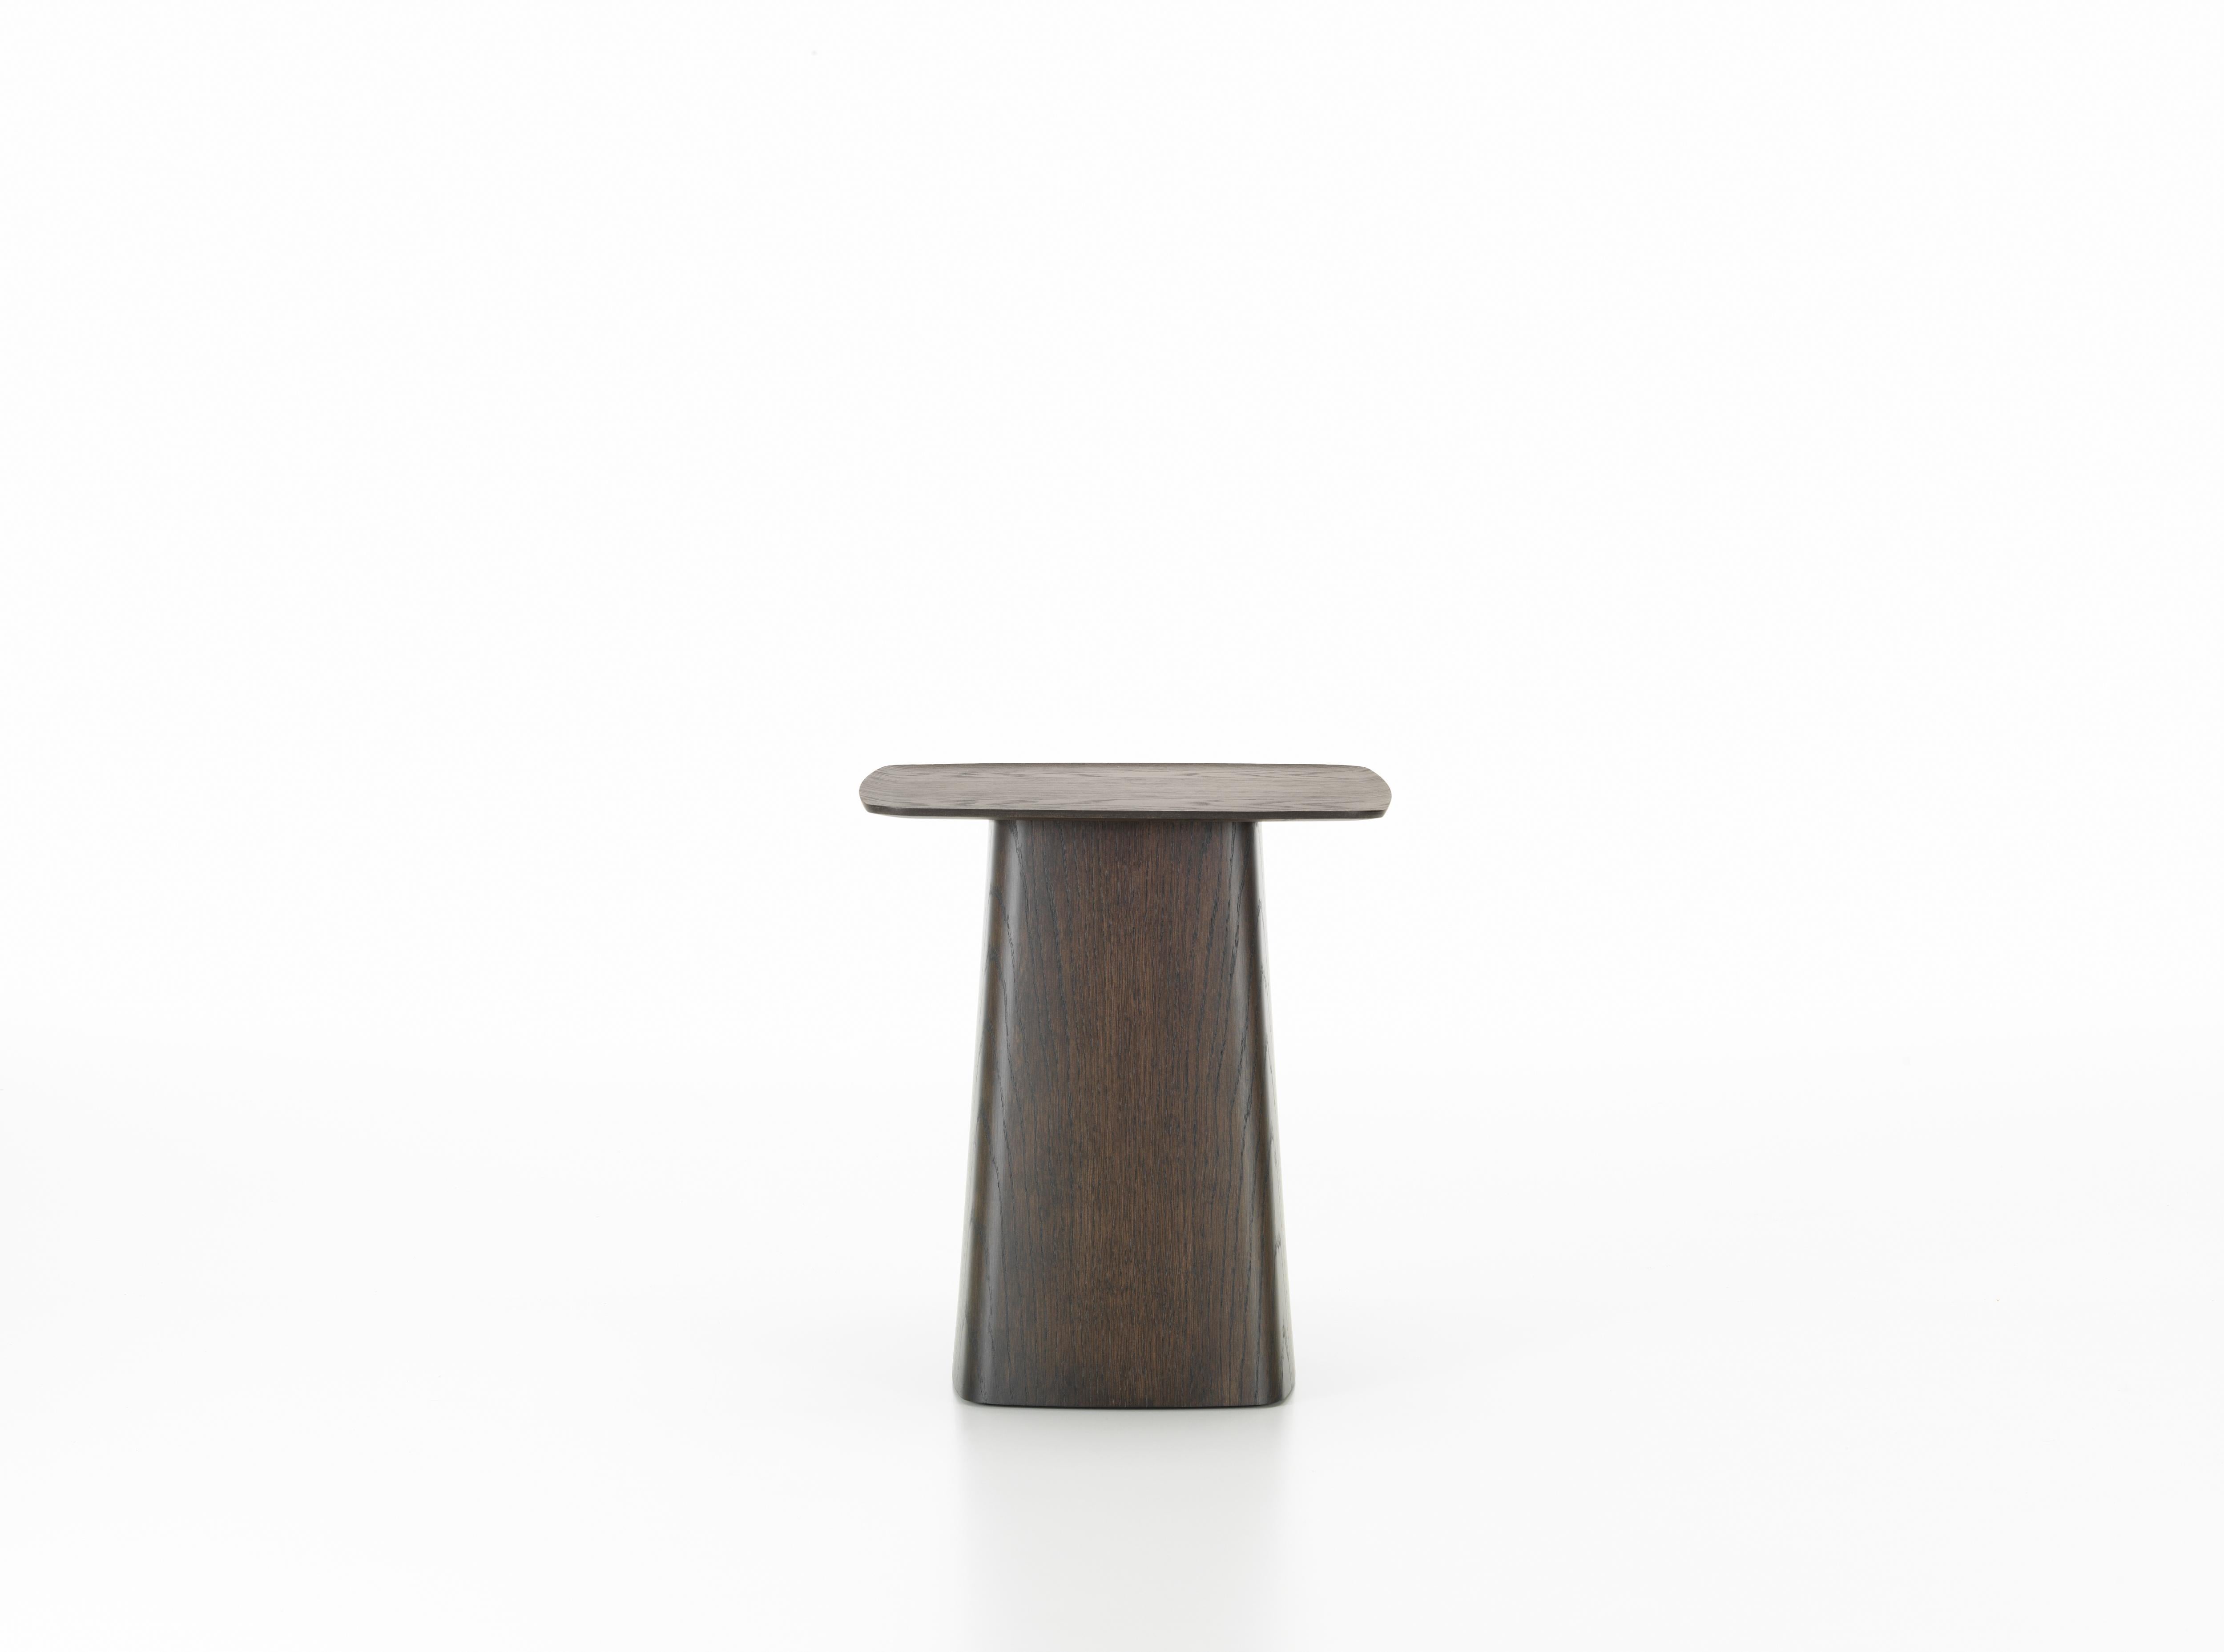 These products are only available in the United States.

The slender tops of the wooden side tables by Ronan and Erwan Bouroullec have a lightly curved lip, lending them an elegant, almost Japanese look. The lightweight occasional tables come in